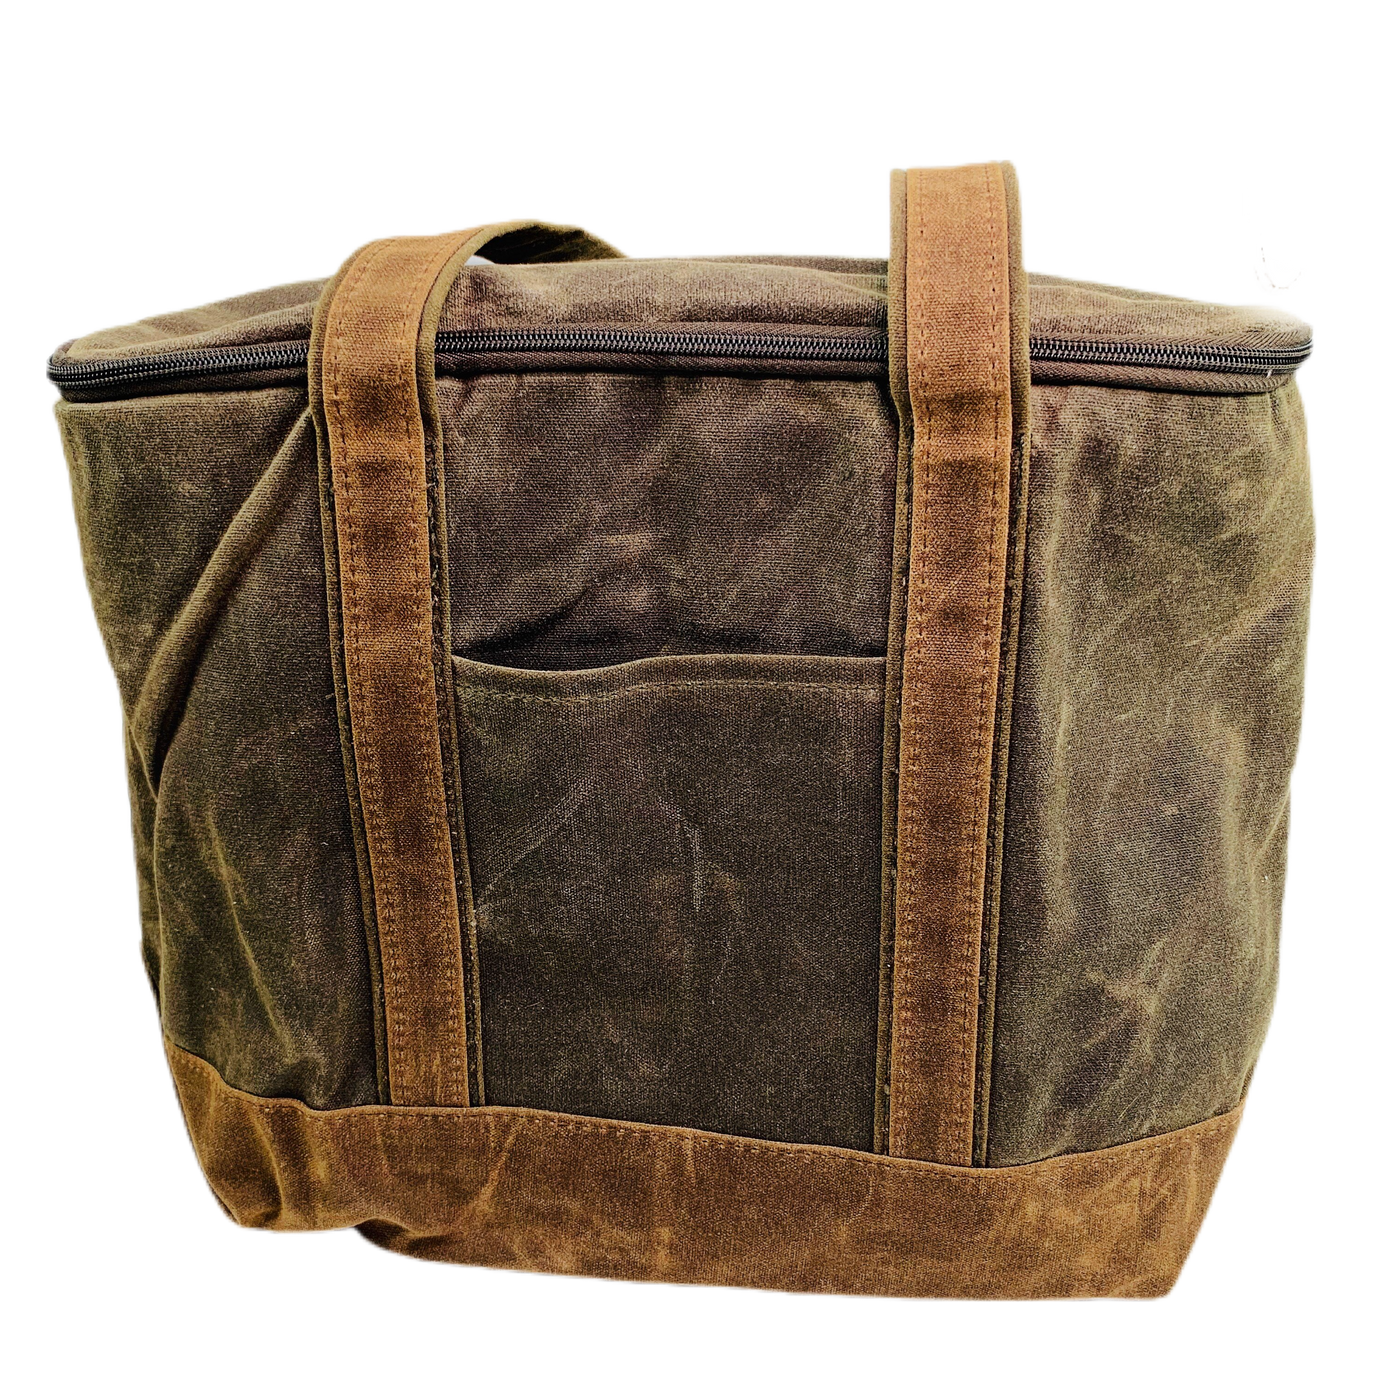 Waxed Canvas Lunch Tote Cooler- Large